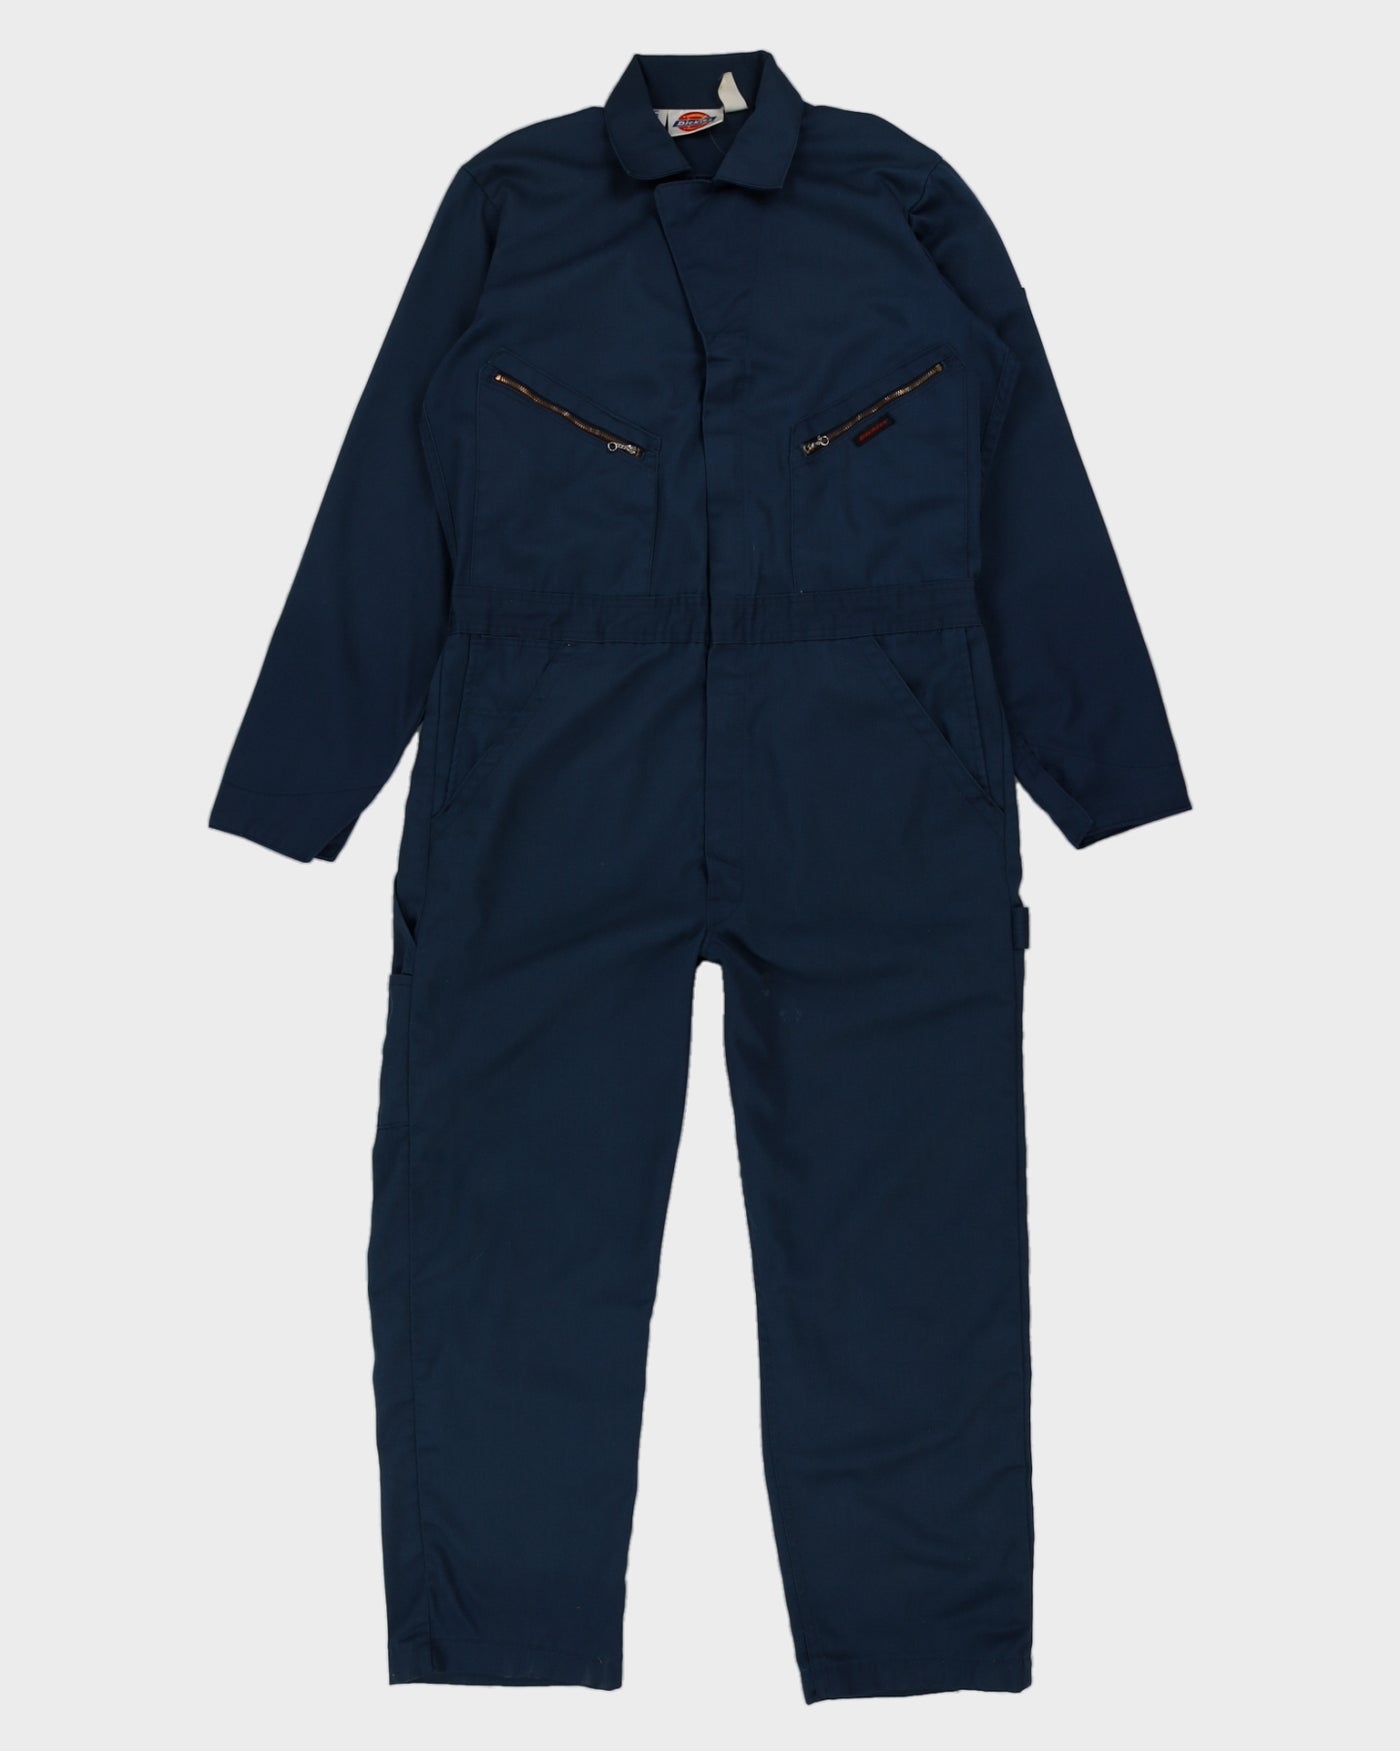 00s Dickies Blue Navy Workwear Coveralls / Overalls - 40L